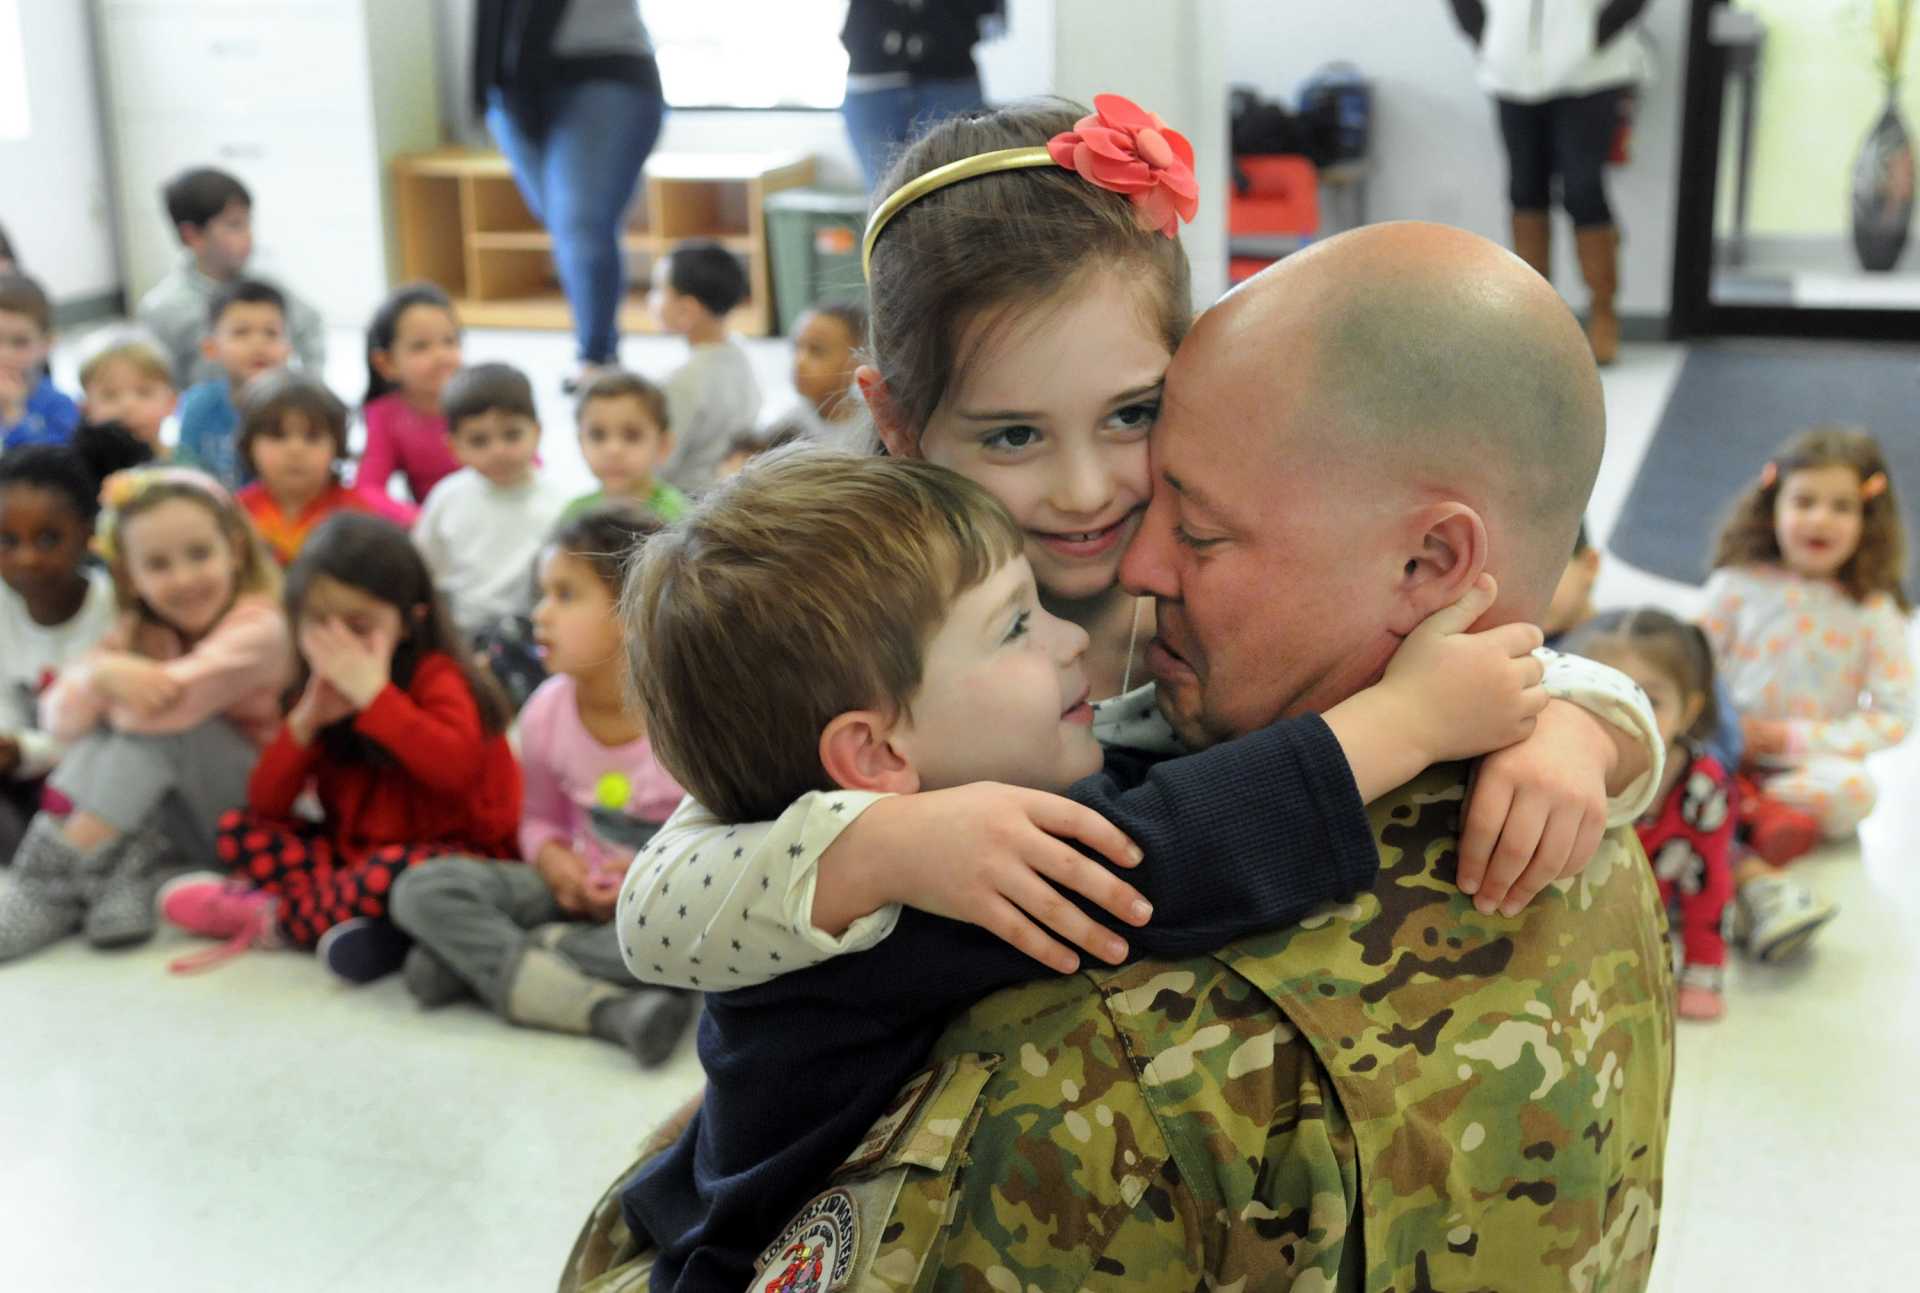 After an absence of six months, children hug their soldier father when he surprised them with a visit to their school. Thomas Geanuracos, 41, a Danbury police officer and Air National Guardsman had been stationed in Iraq.